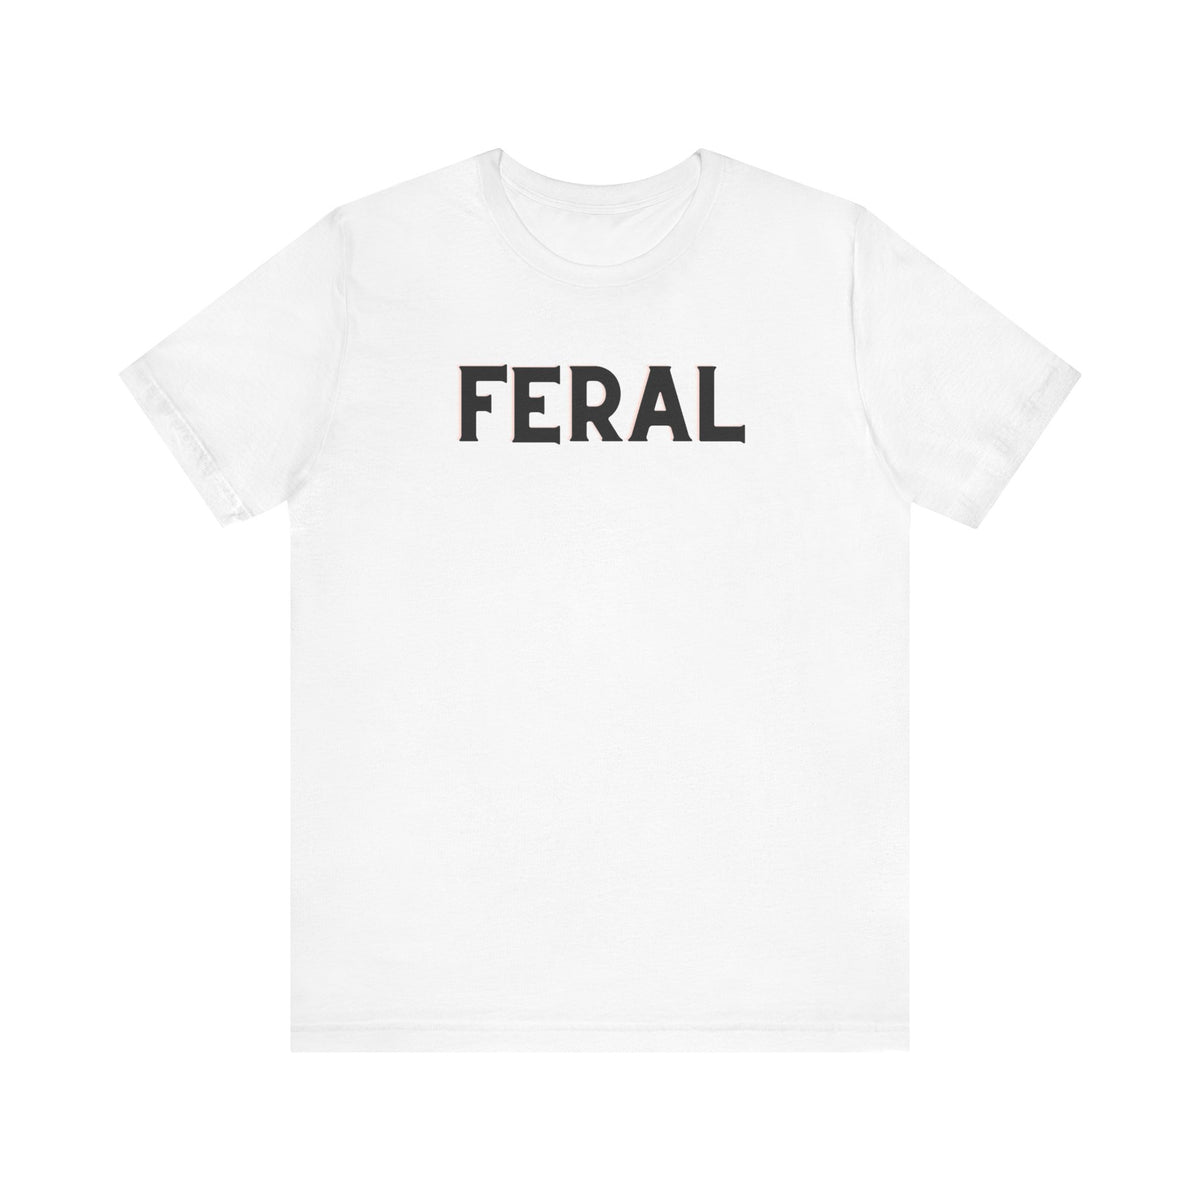 Feral T-shirt | Funny Graphic T-Shirt | Women's Black & White Graphic Tees